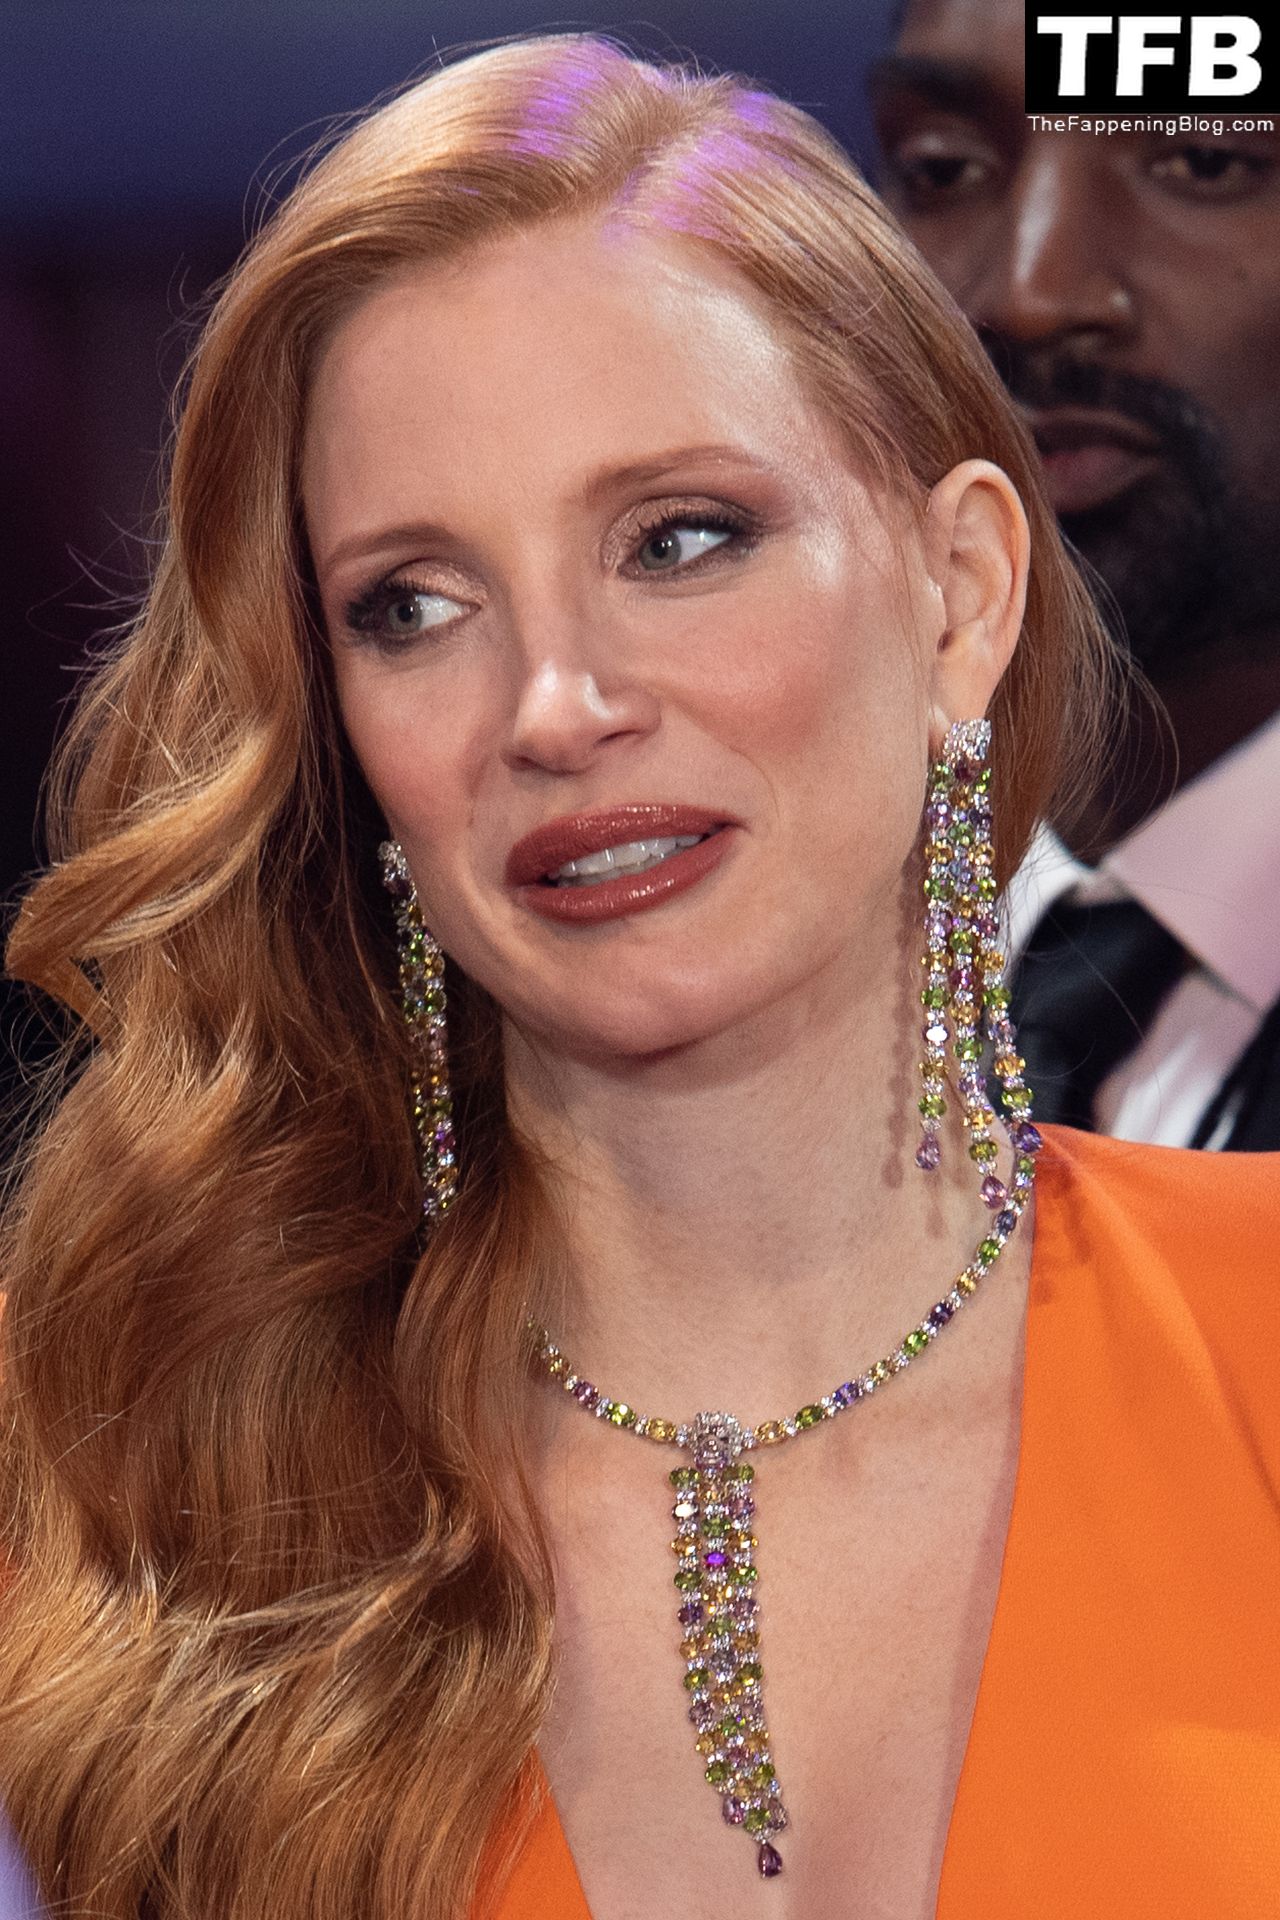 Jessica-Chastain-Sexy-The-Fappening-Blog-101.jpg